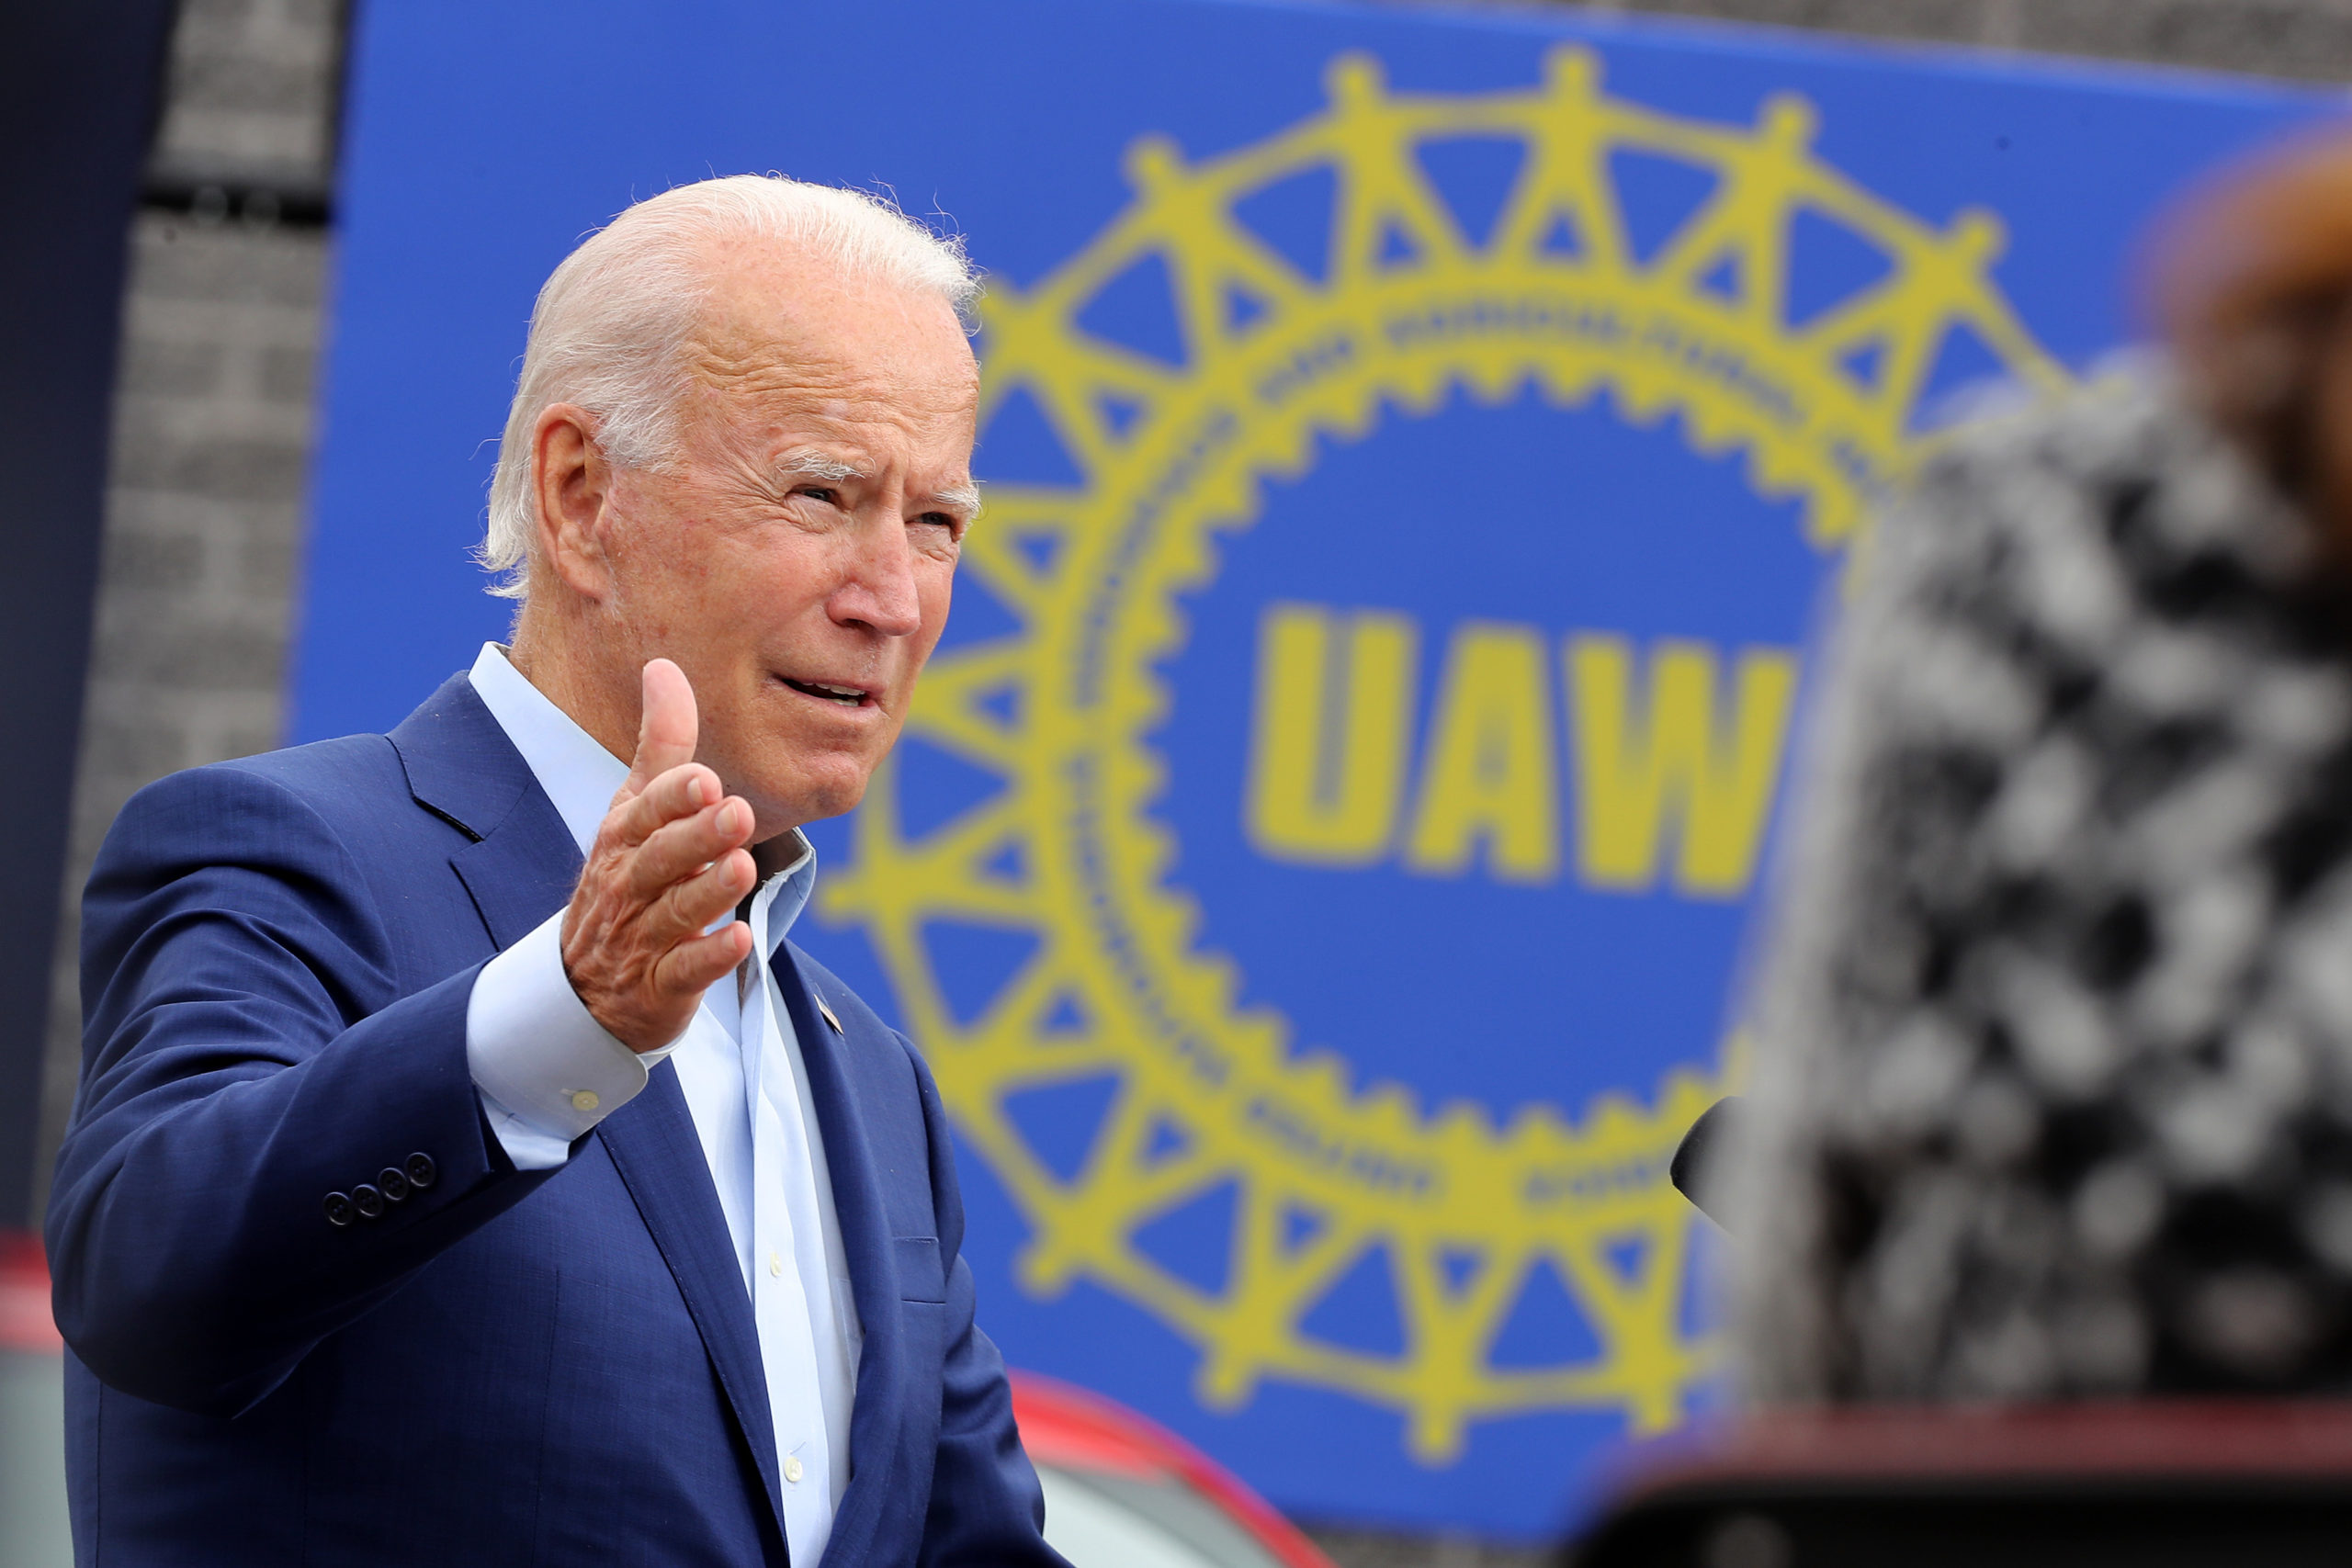 Democratic presidential nominee and former Vice President Joe Biden delivers remarks in the parking lot outside the United Auto Workers Region 1 offices on September 09, 2020 in Warren, Michigan. (Chip Somodevilla/Getty Images)